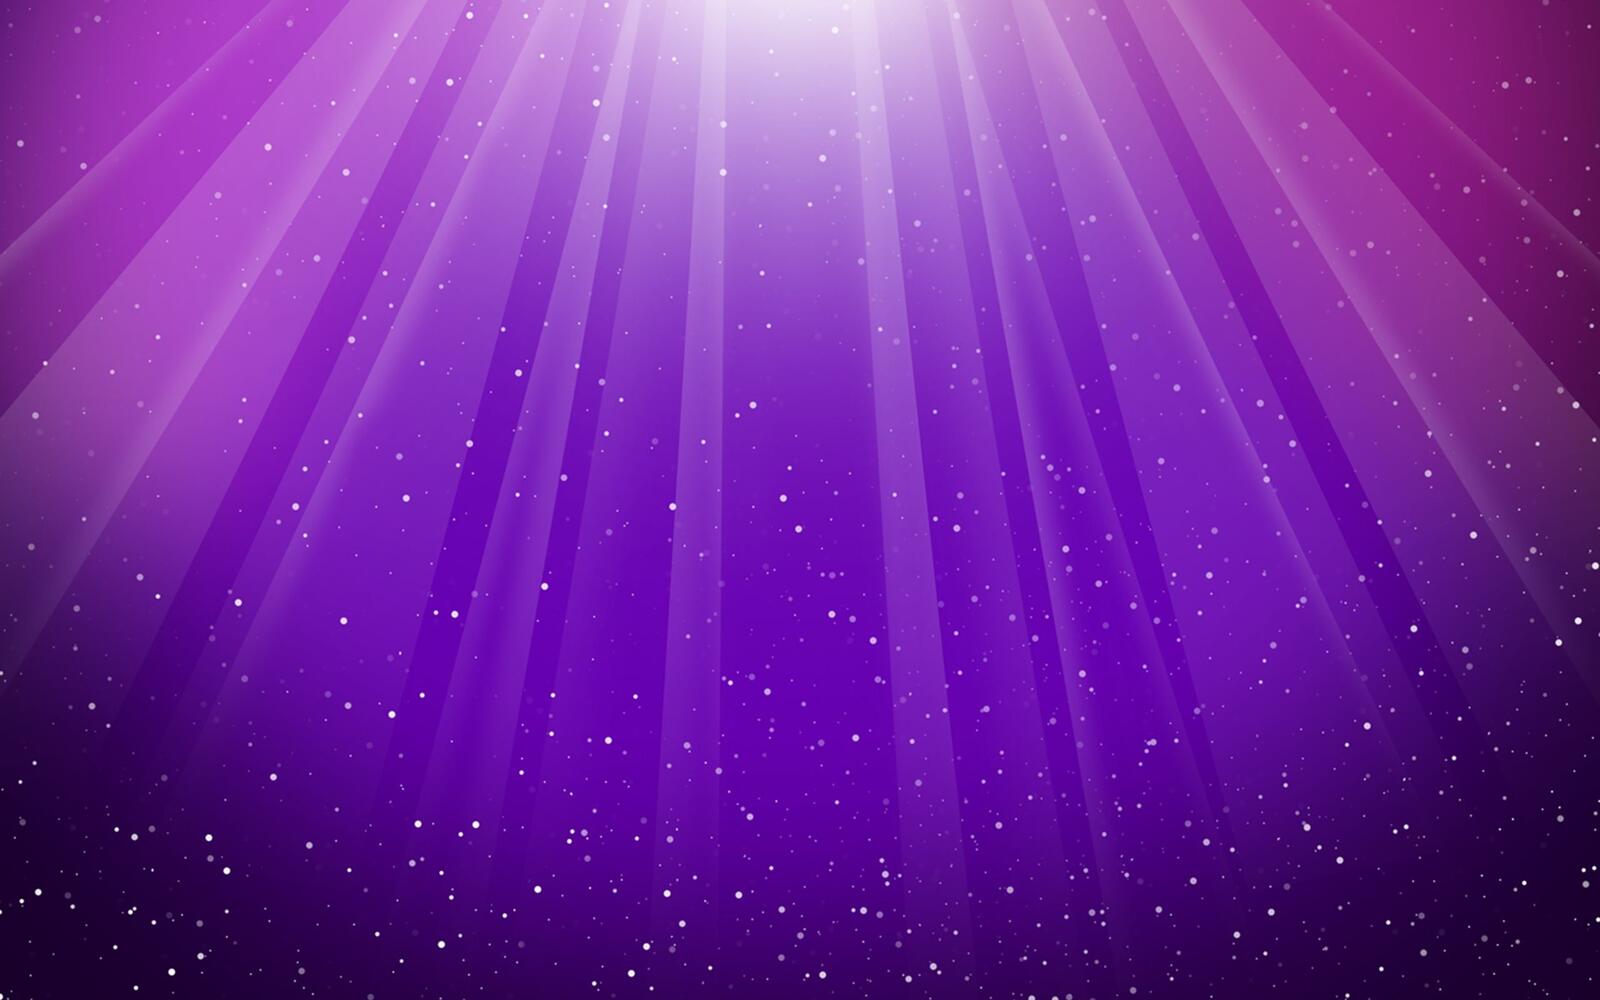 Free photo Rays of light with sparkles on a pink and purple background